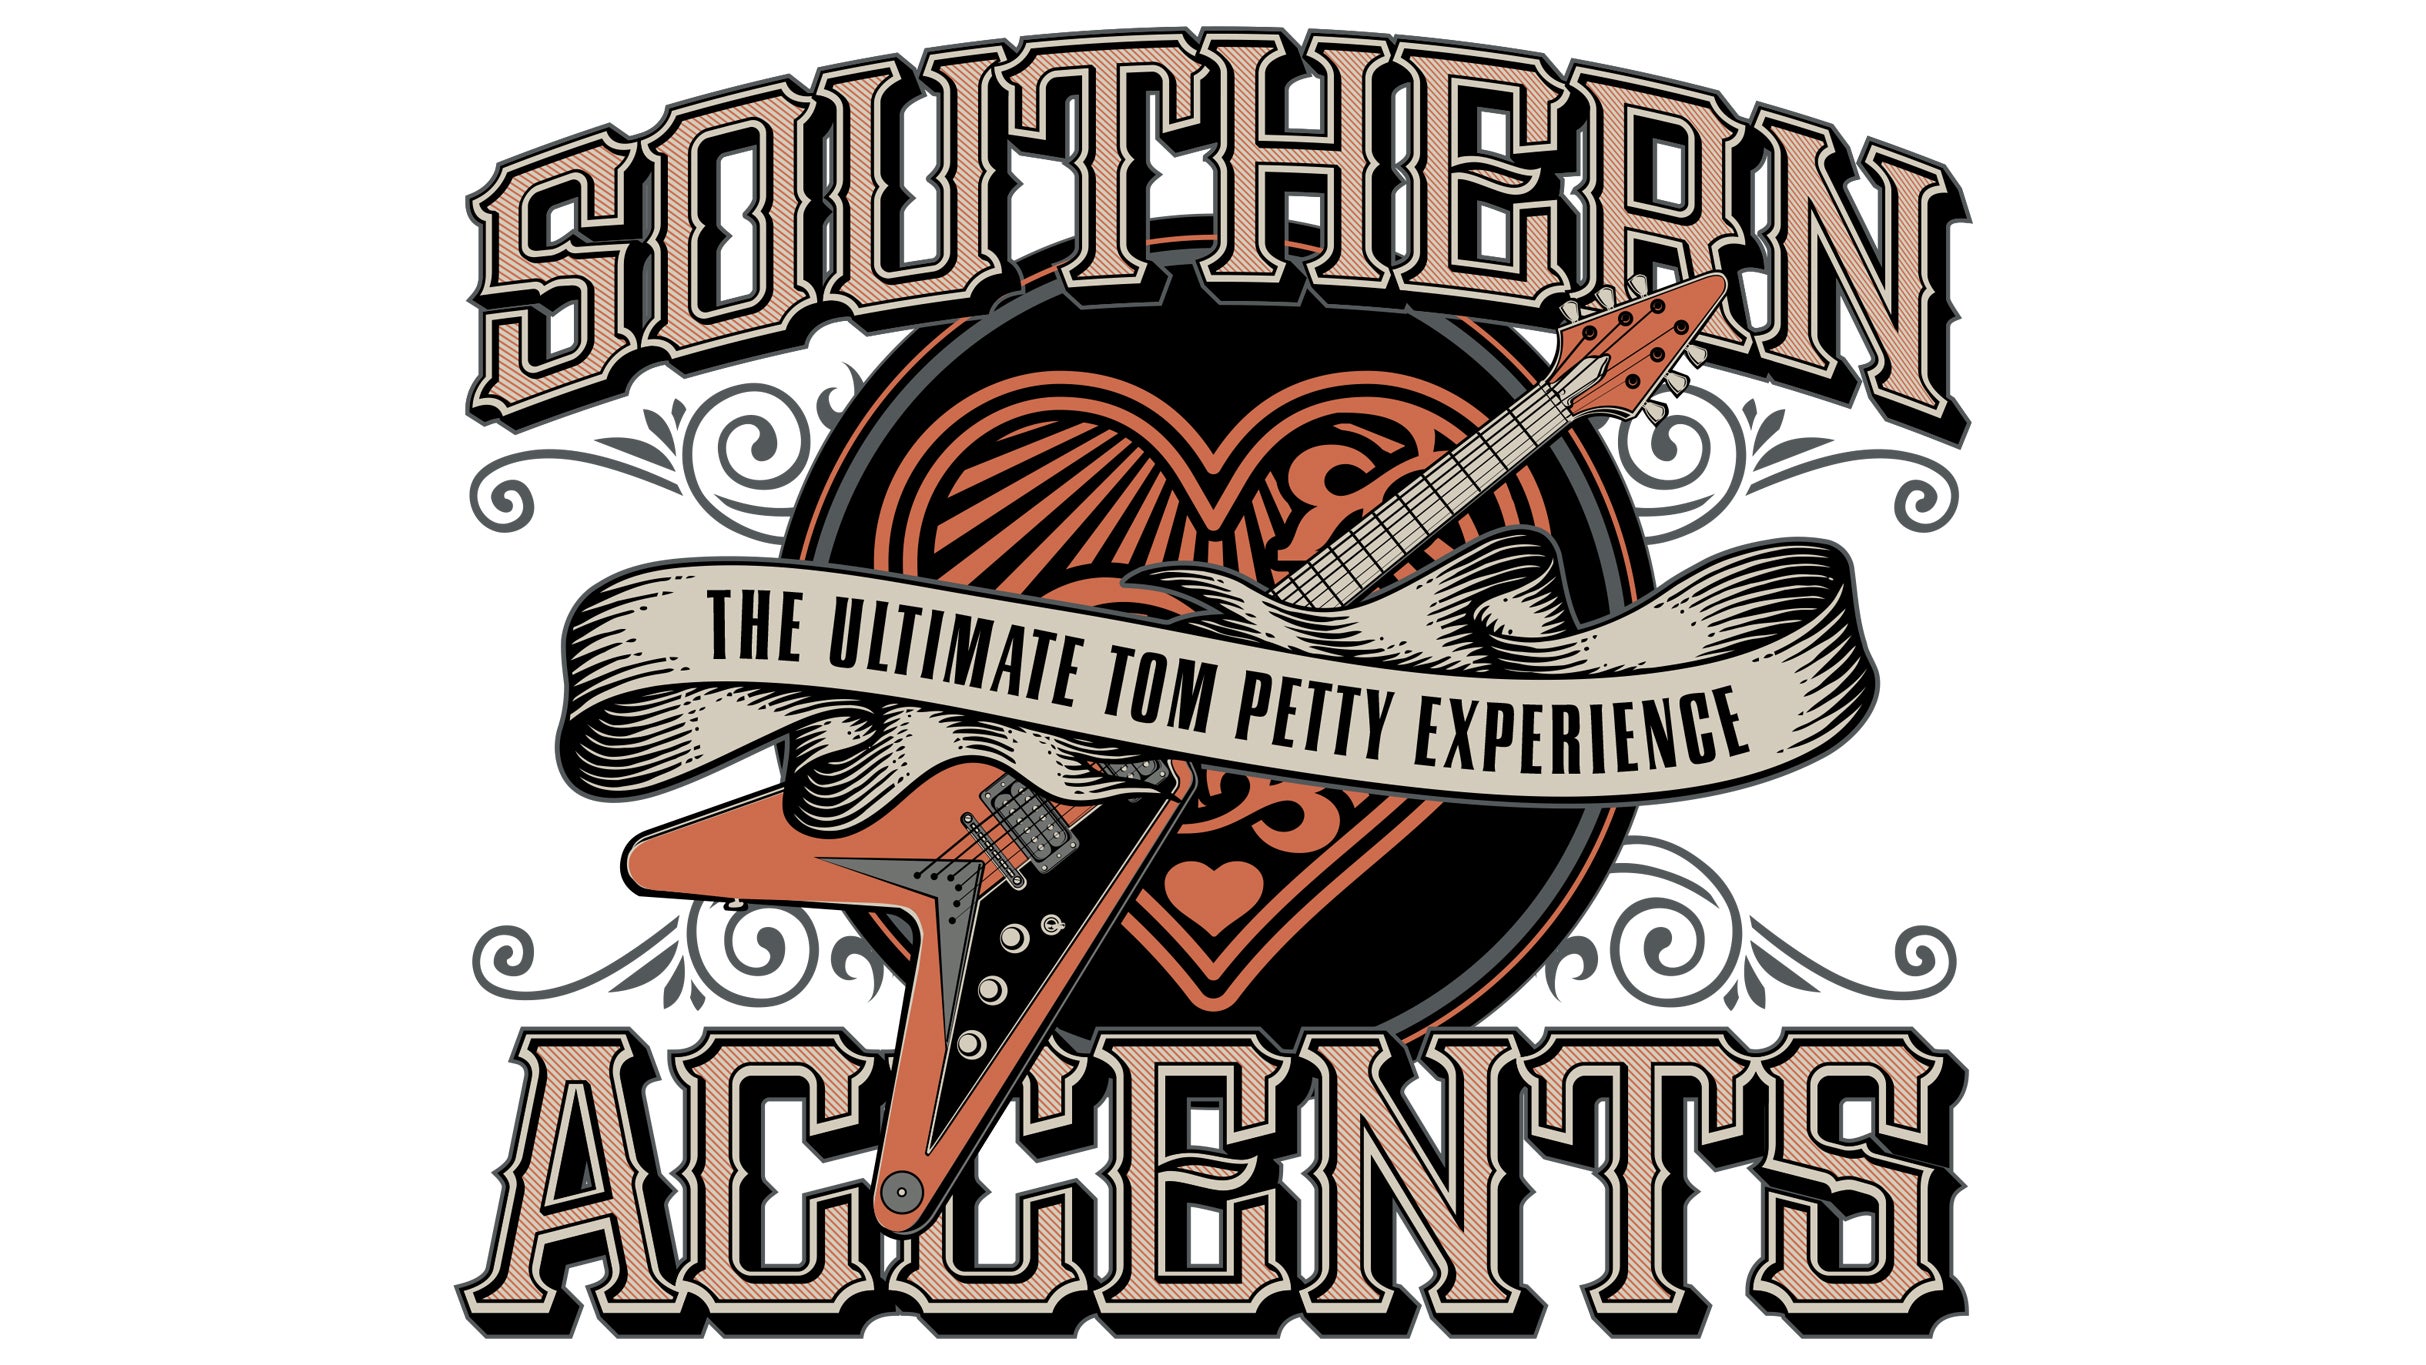 Southern Accents-The Ultimate Tribute to Tom Petty & The Heartbreakers in Louisville promo photo for Ticketmaster presale offer code